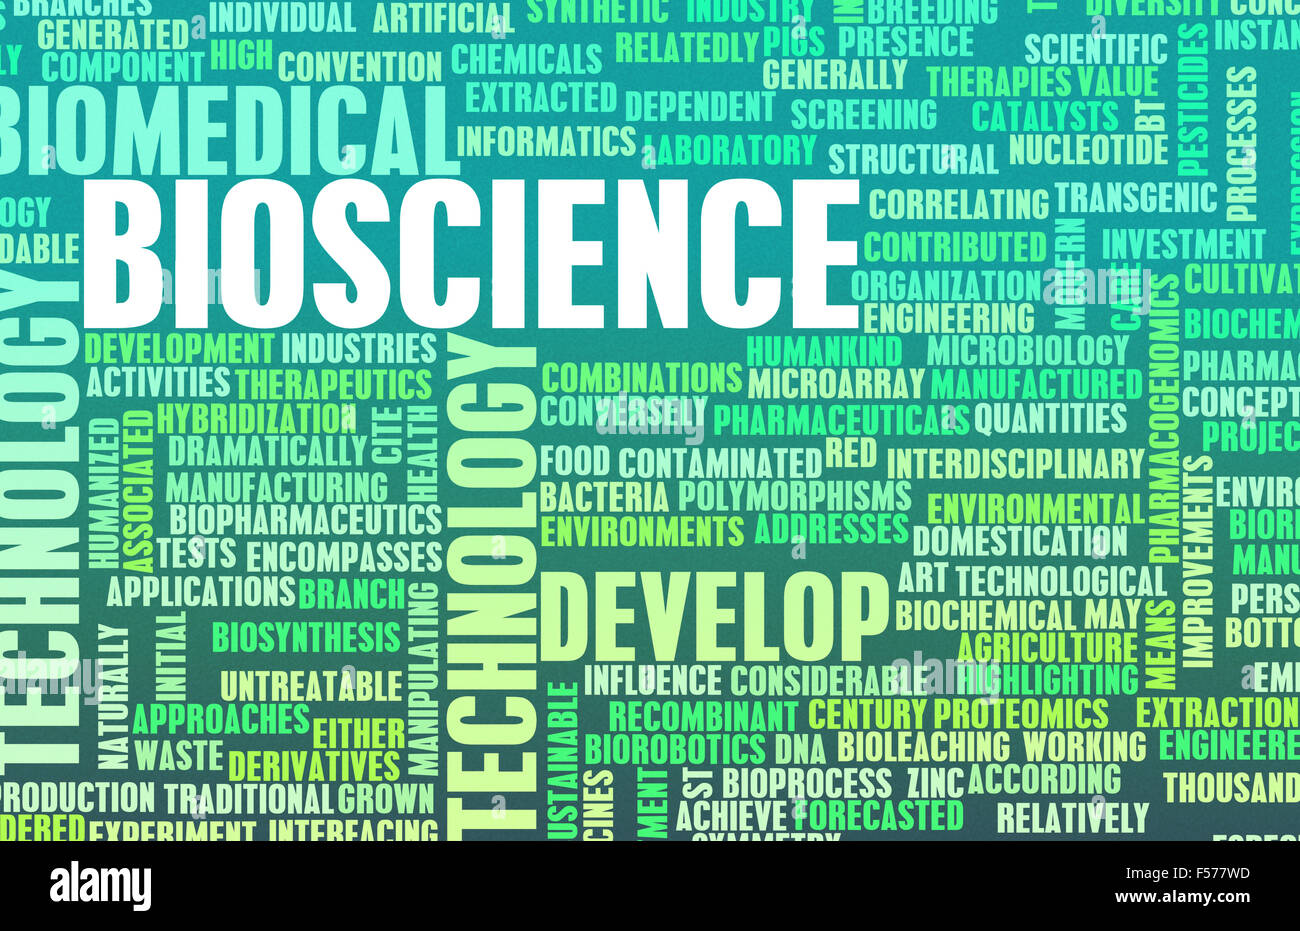 Bioscience or Biotechnology as a Science Biology Concept Stock Photo